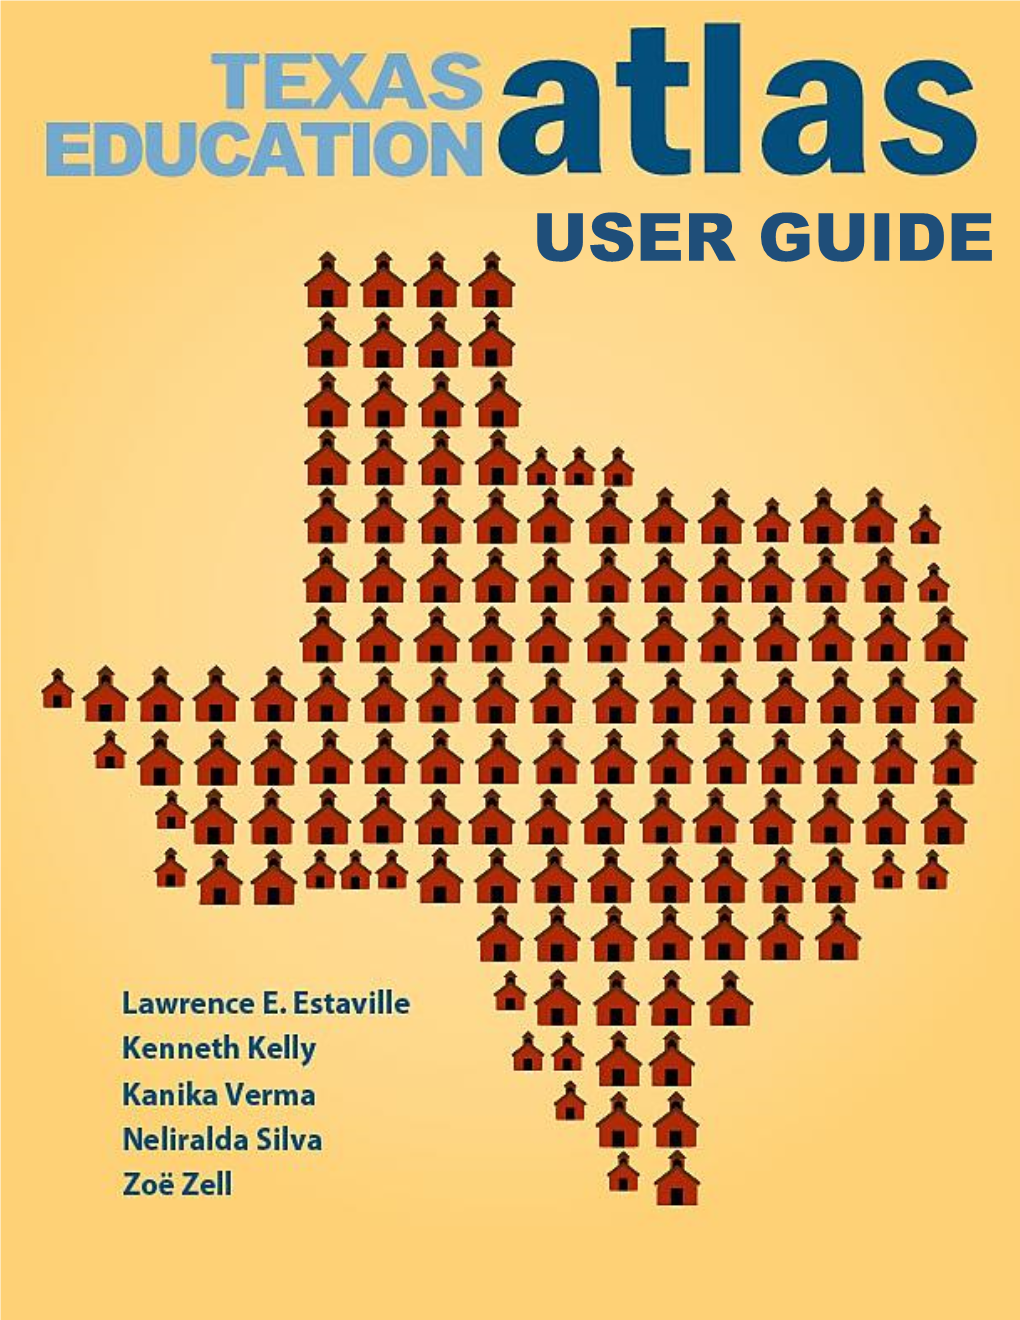 User Guide Table of Contents